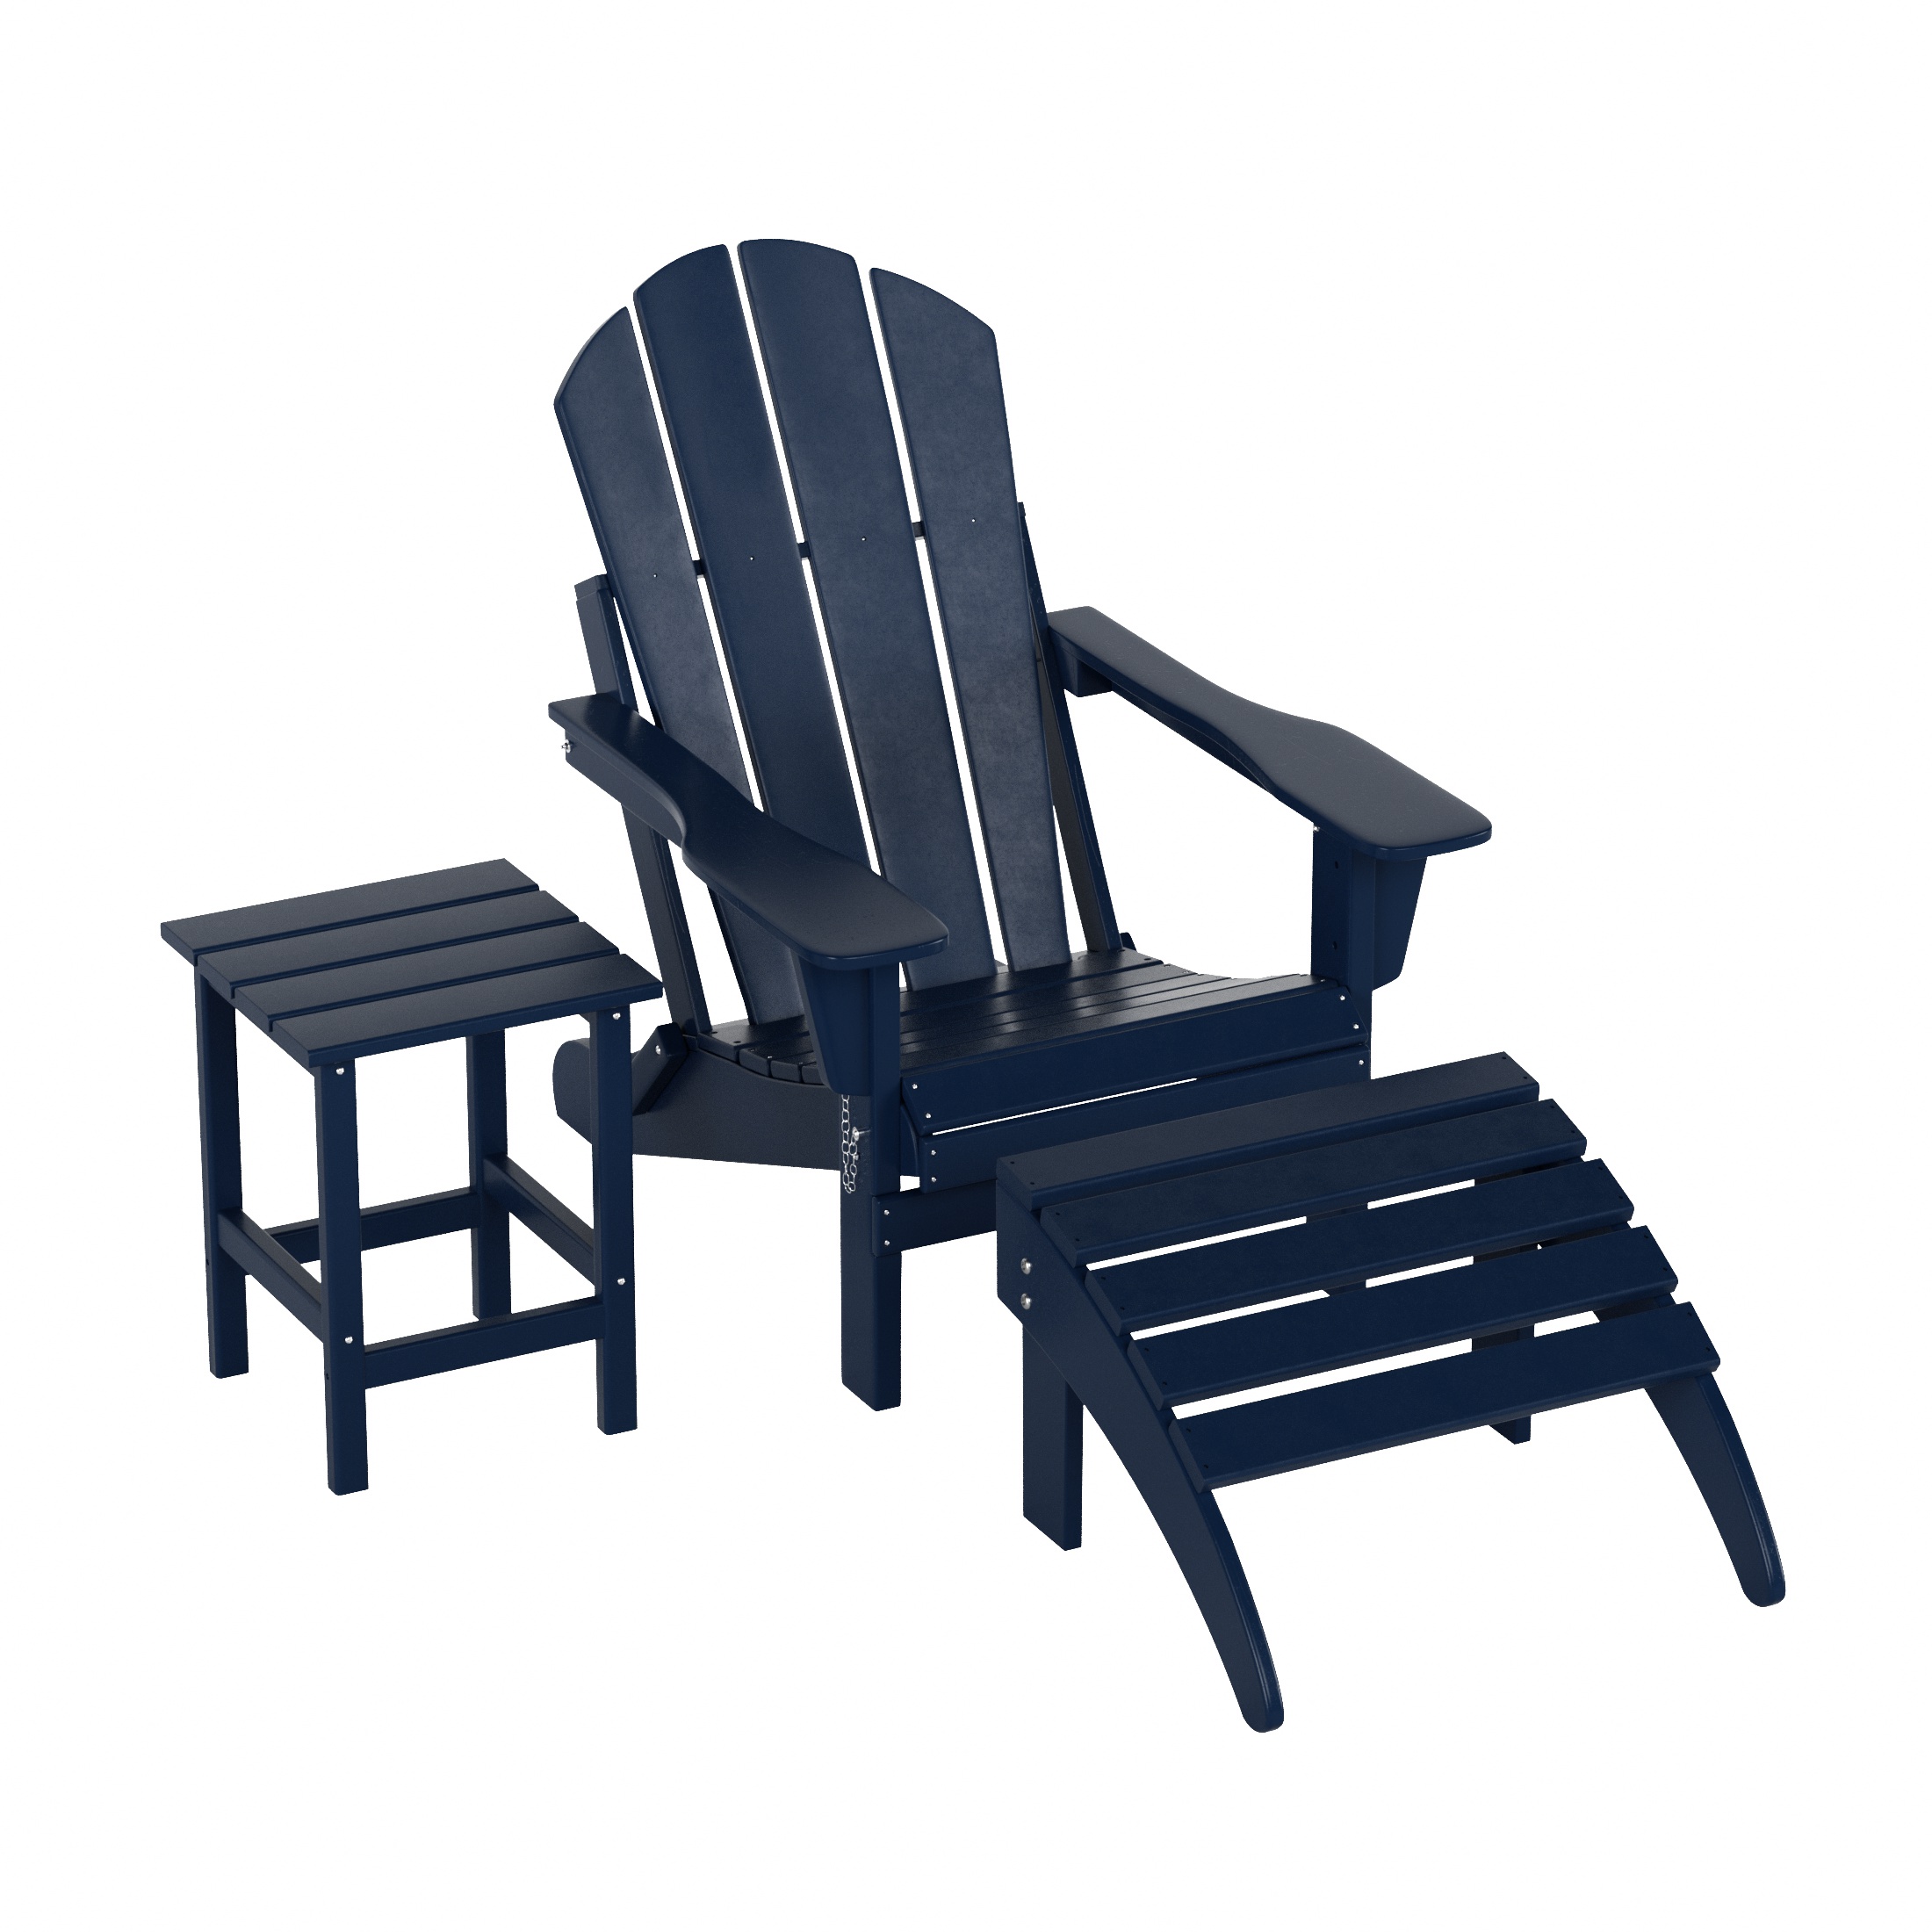 WestinTrends Malibu Outdoor Lounge Chairs, 3-Pieces Adirondack Chair Set with Ottoman and Side Table, All Weather Poly Lumber Patio Lawn Folding Chair for Outside Pool Garden Backyard, Navy Blue - image 1 of 7